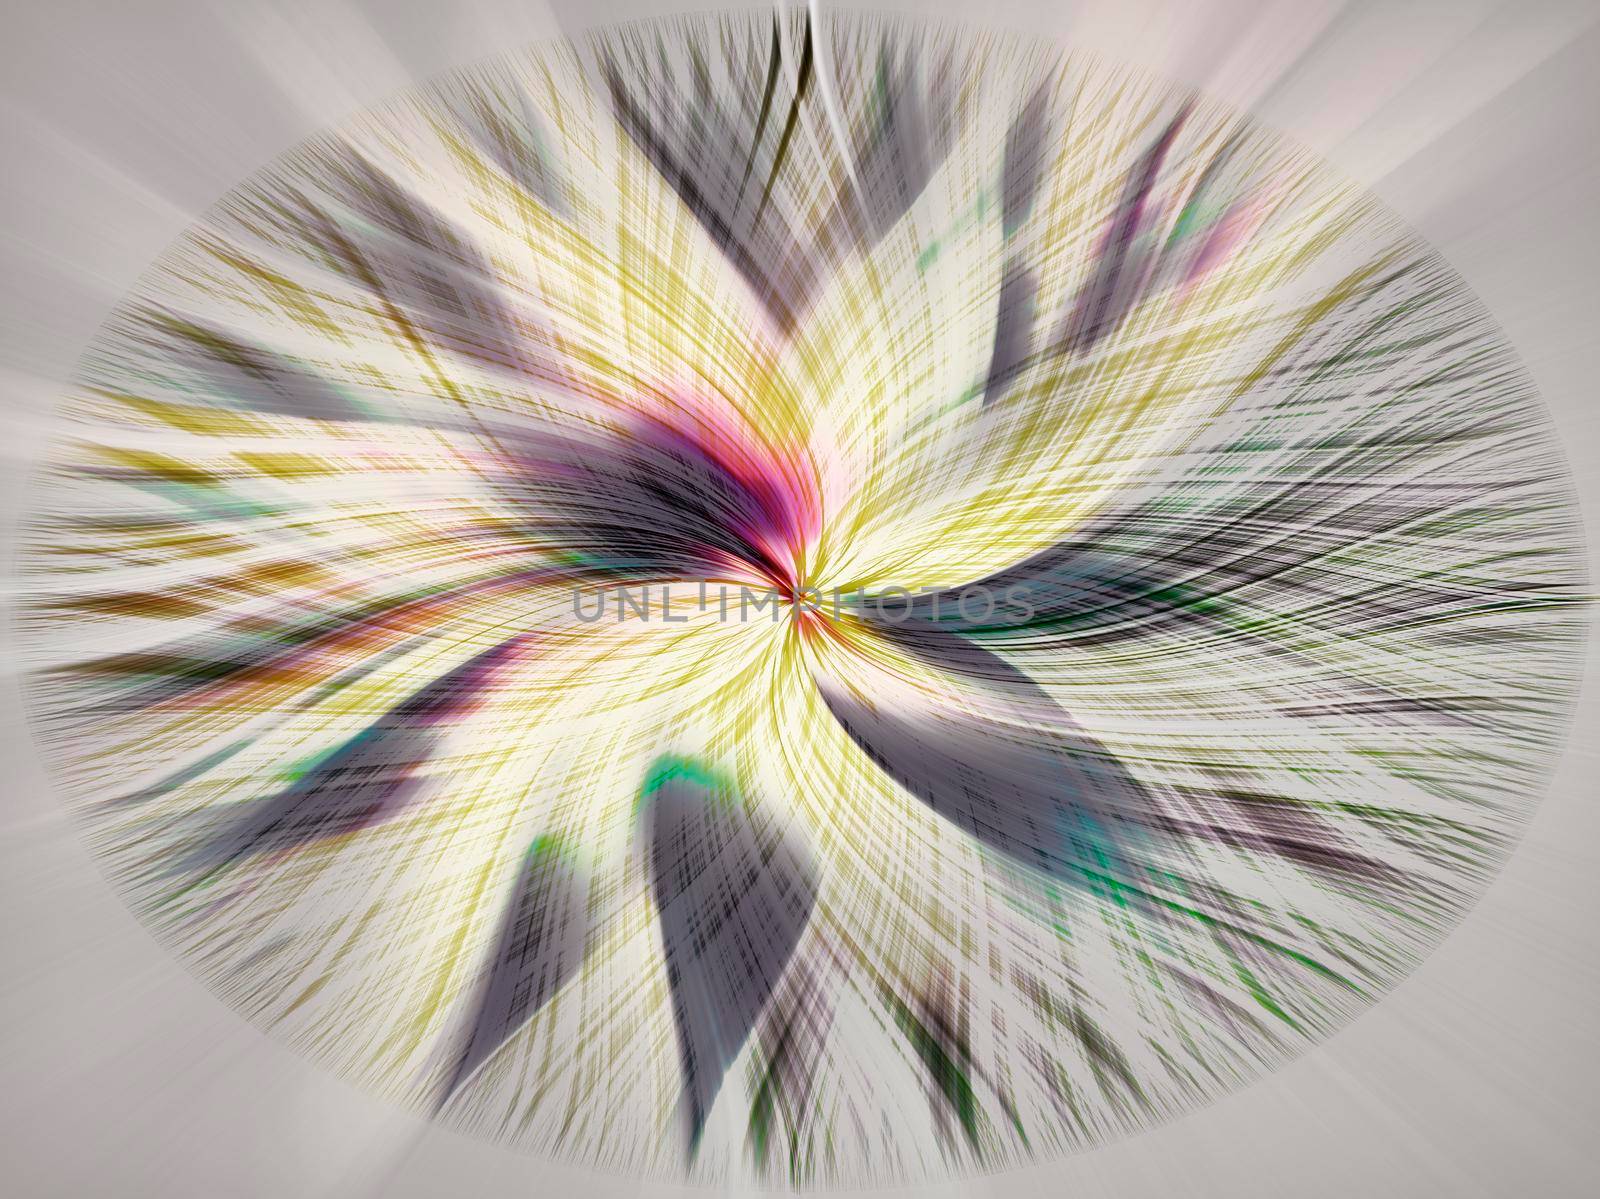 Abstract blurry image of a beautiful large rudbeckia flower on a dark background.